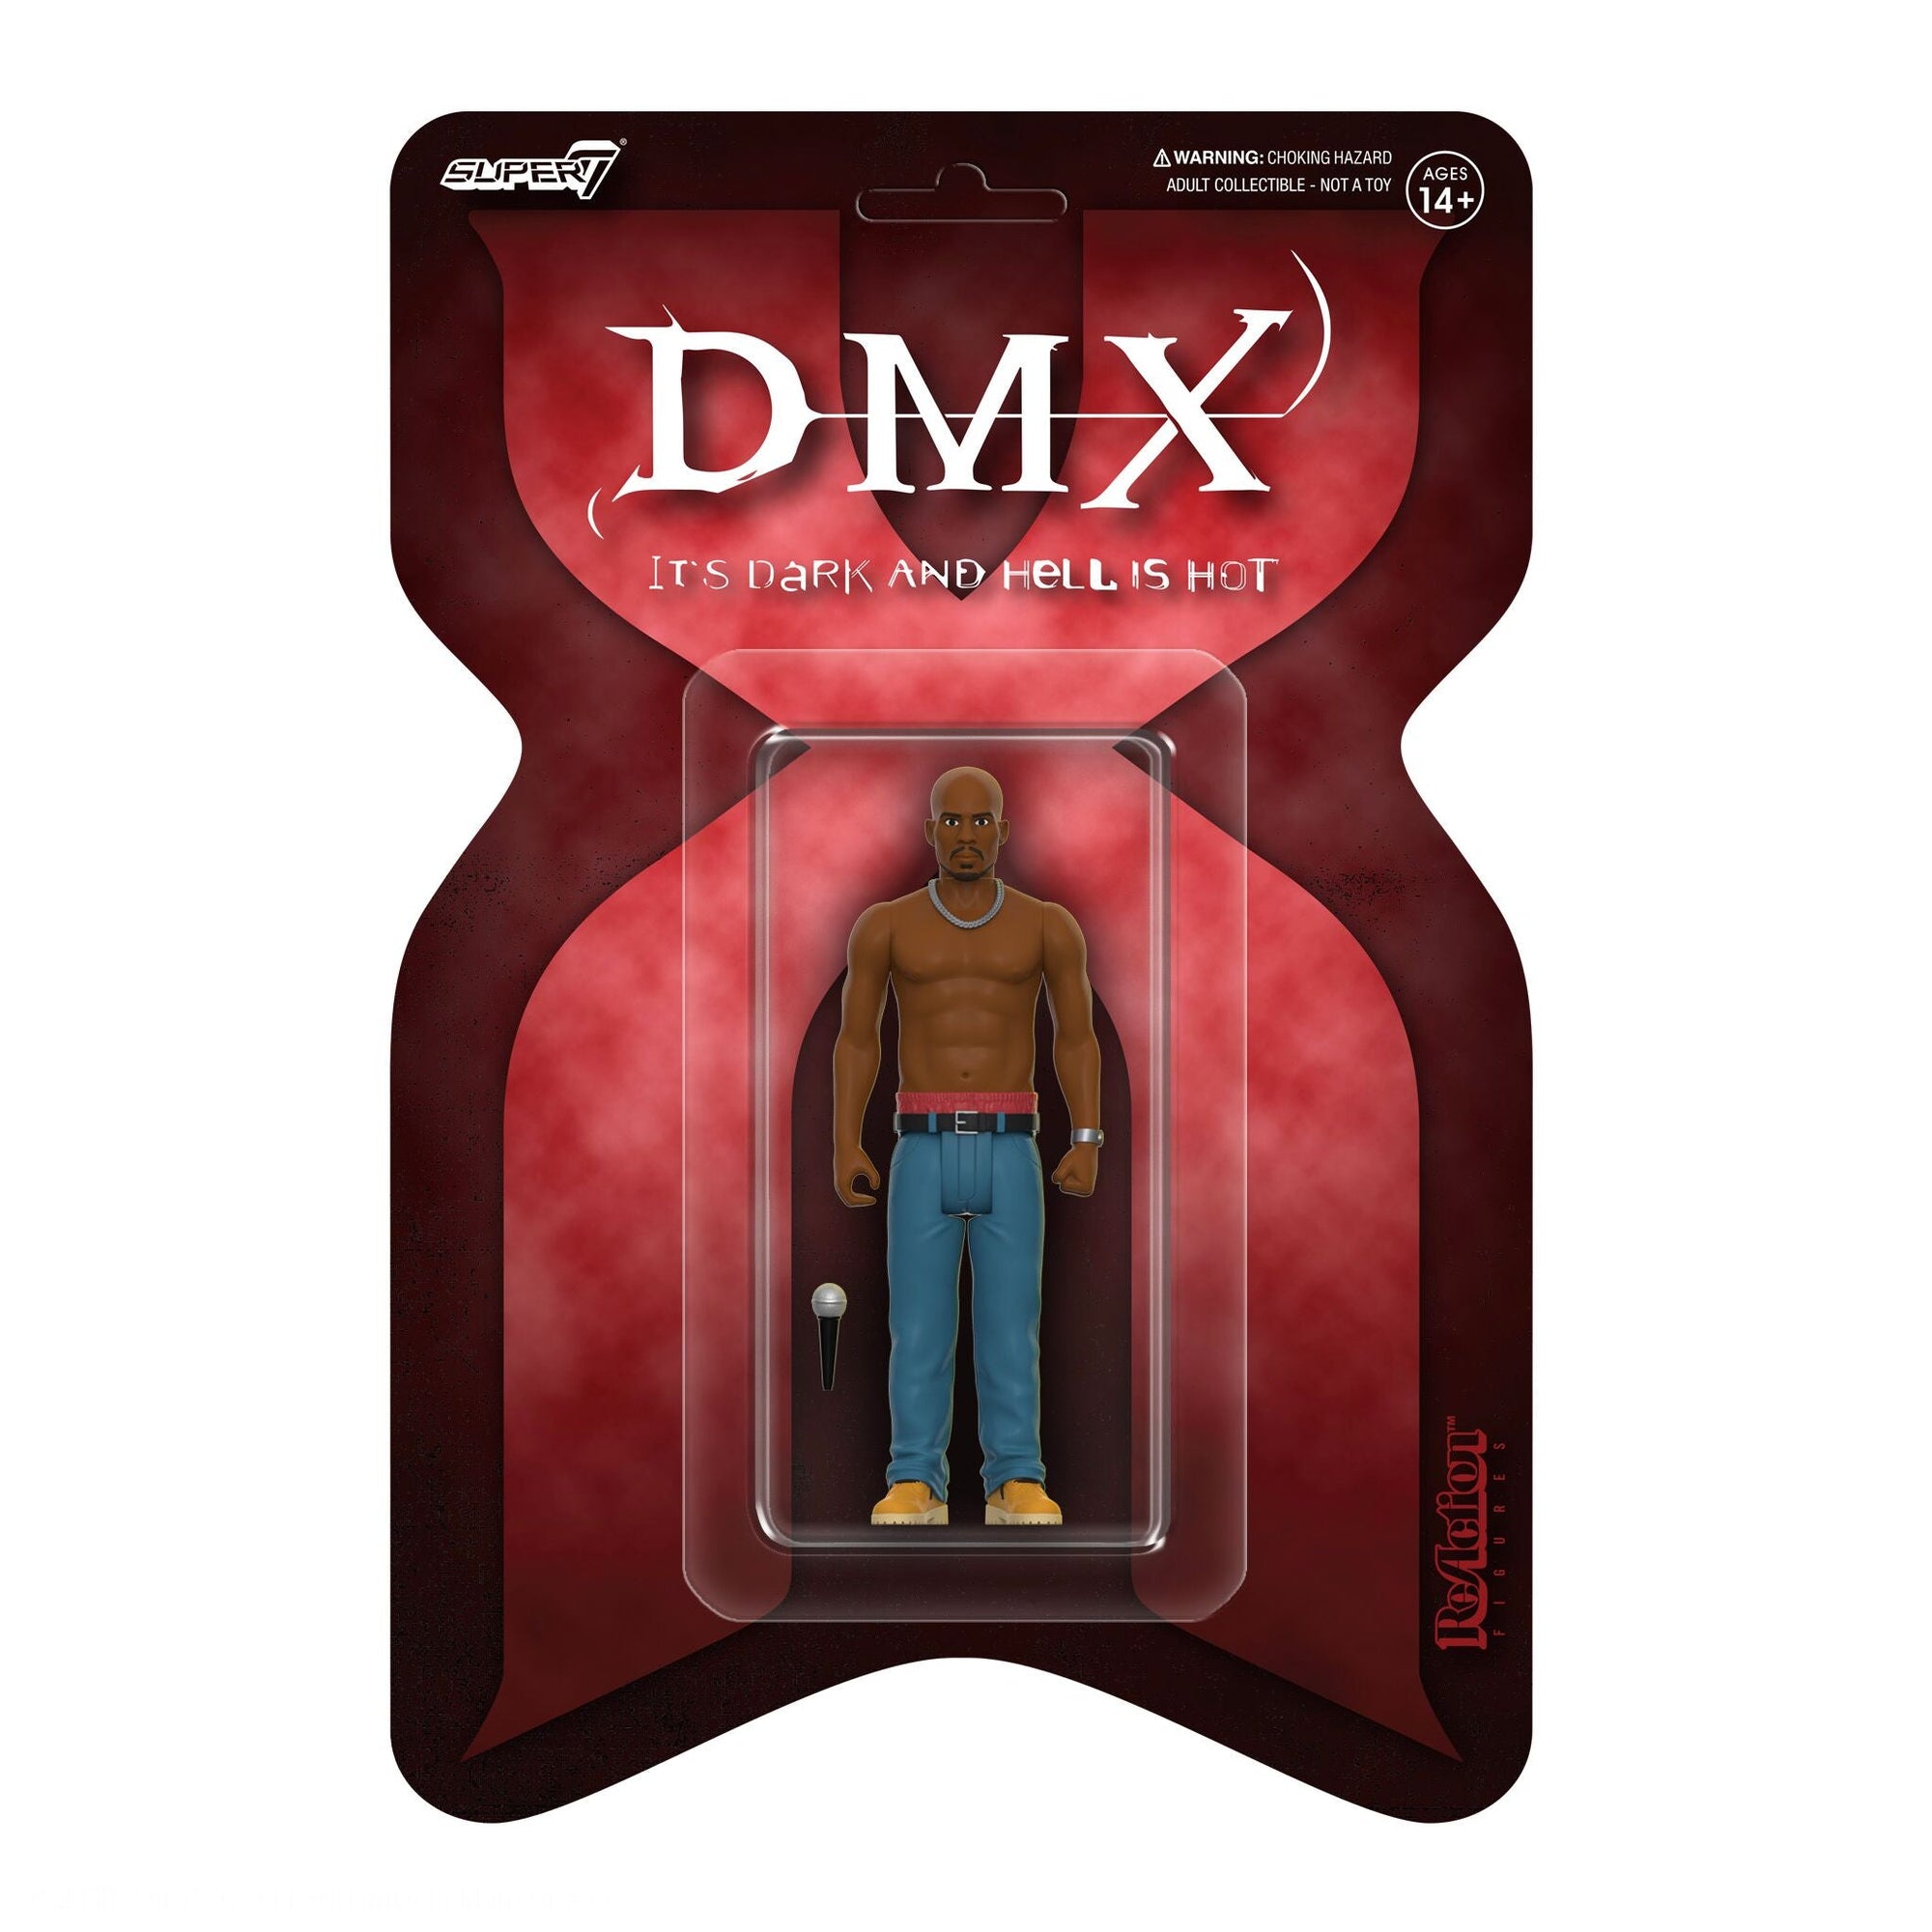 DMX ReAction Figure - DMX (It's Dark And Hell Is Hot) by Super7